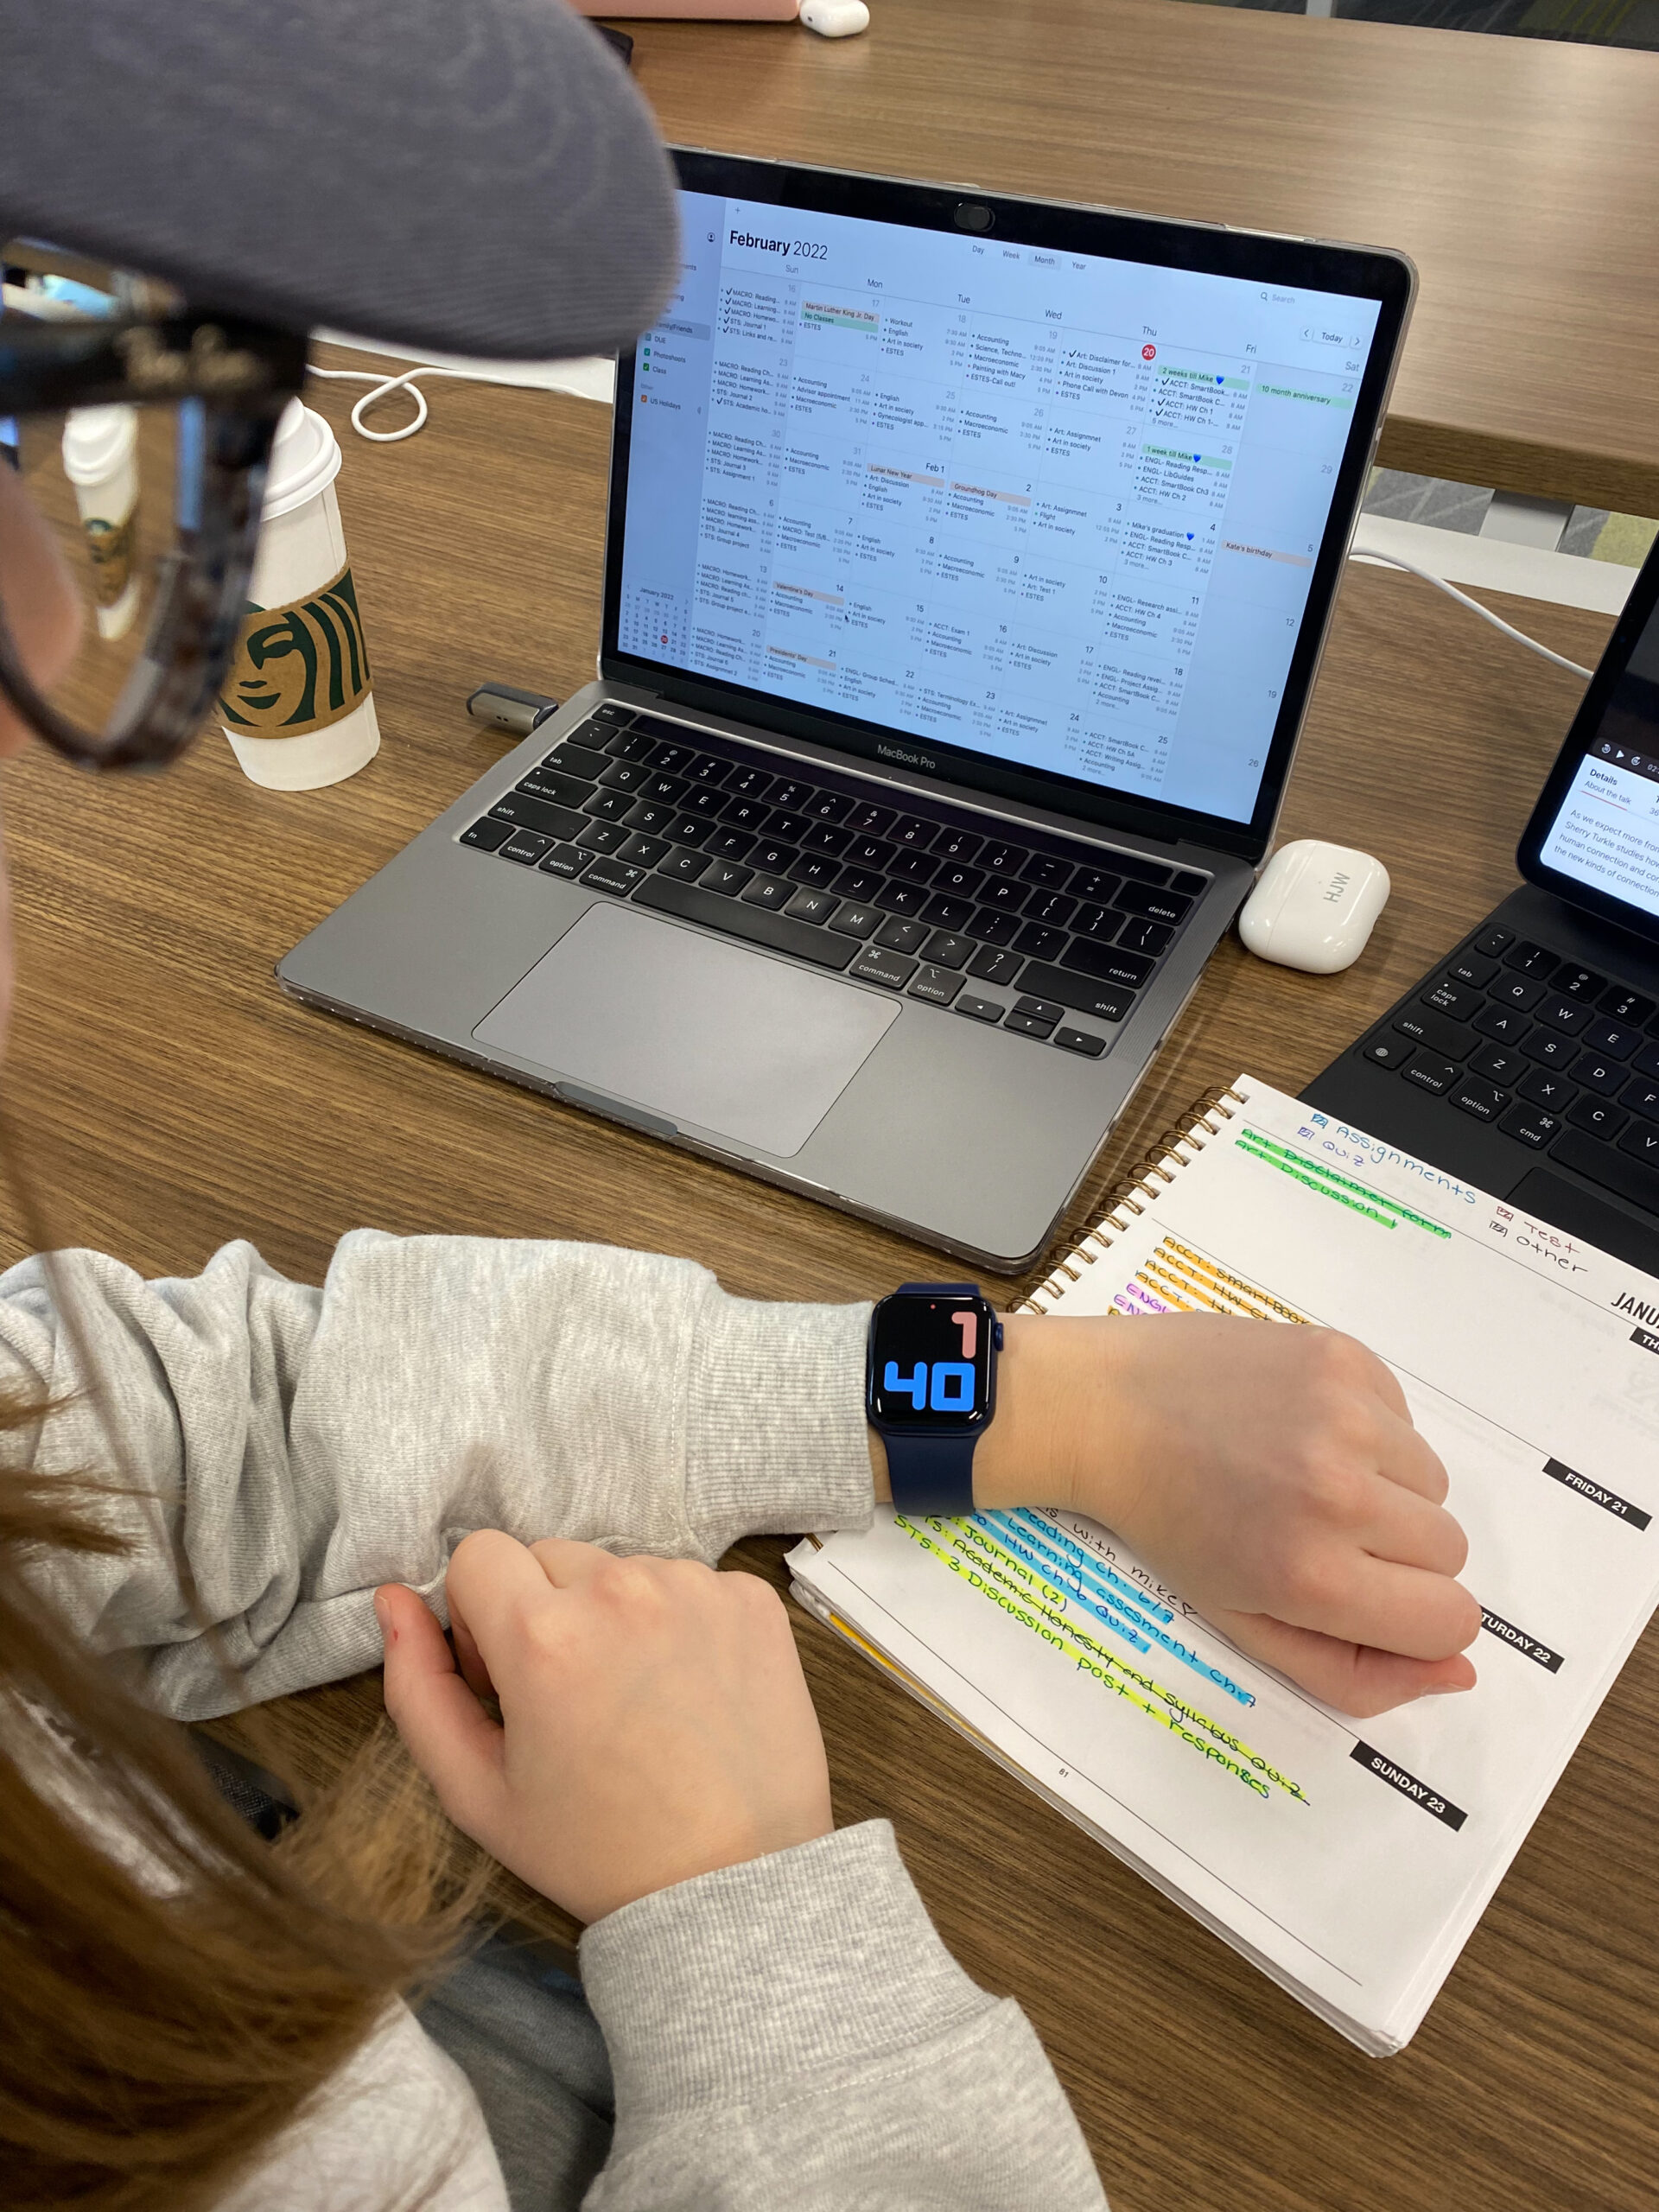 Learning how to properly manage your time is an important skill that can help you stay on top of school, work, and personal affairs. Planners, calendars, and schedules are all great and effective ways to help with time management. Photographer: Emma Eagle.